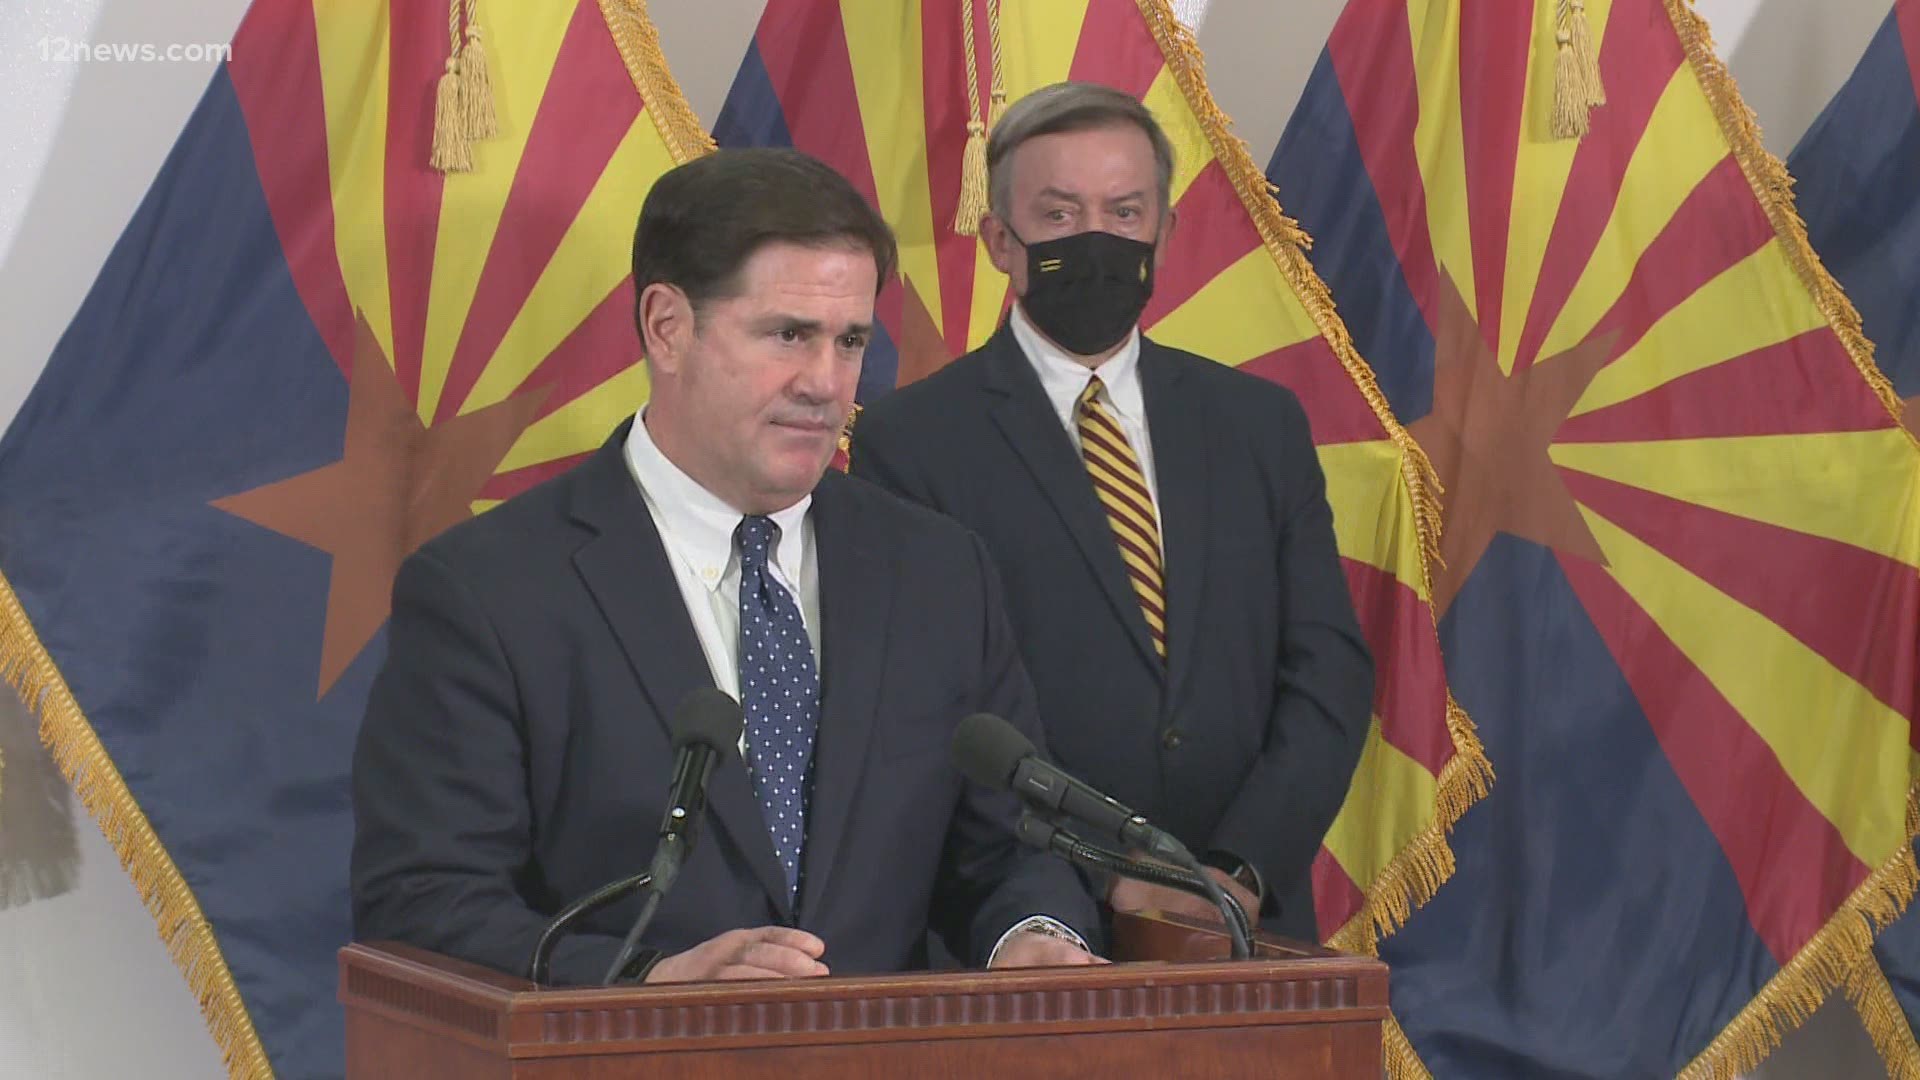 The State of Arizona is giving its three public universities $14 million to continue the fight against COVID-19. Ducey praised all three universities for their work.